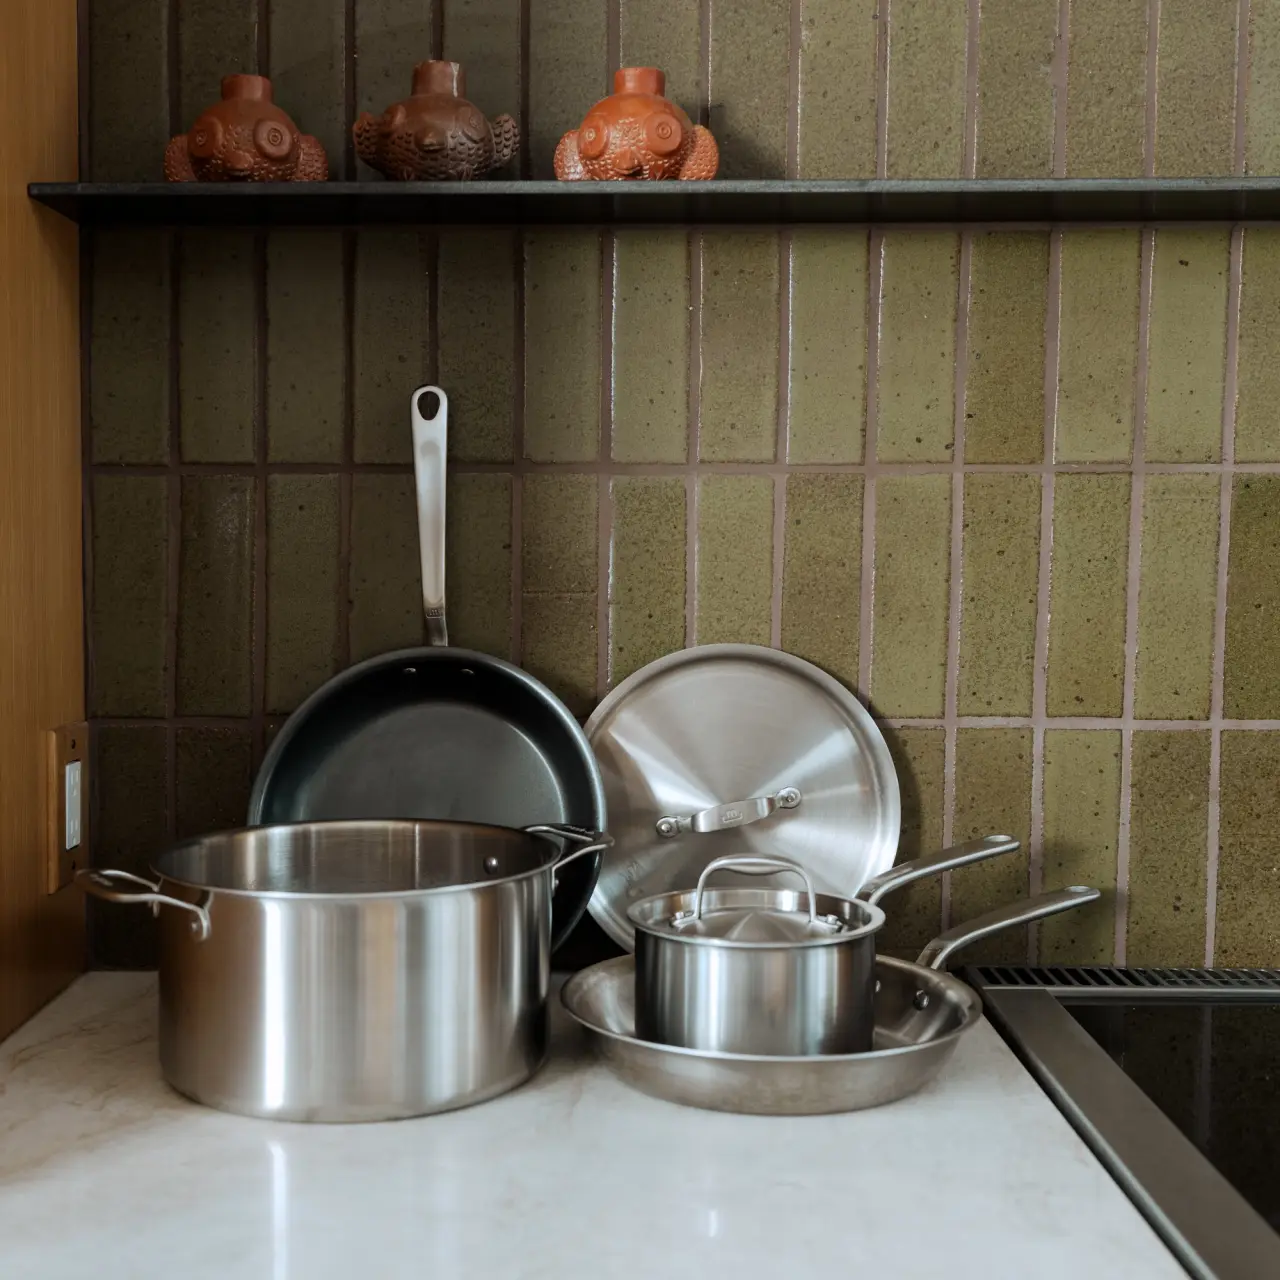 A neatly arranged set of stainless steel cookware sits on a kitchen counter beside a stovetop, with decorative items on the shelf above.